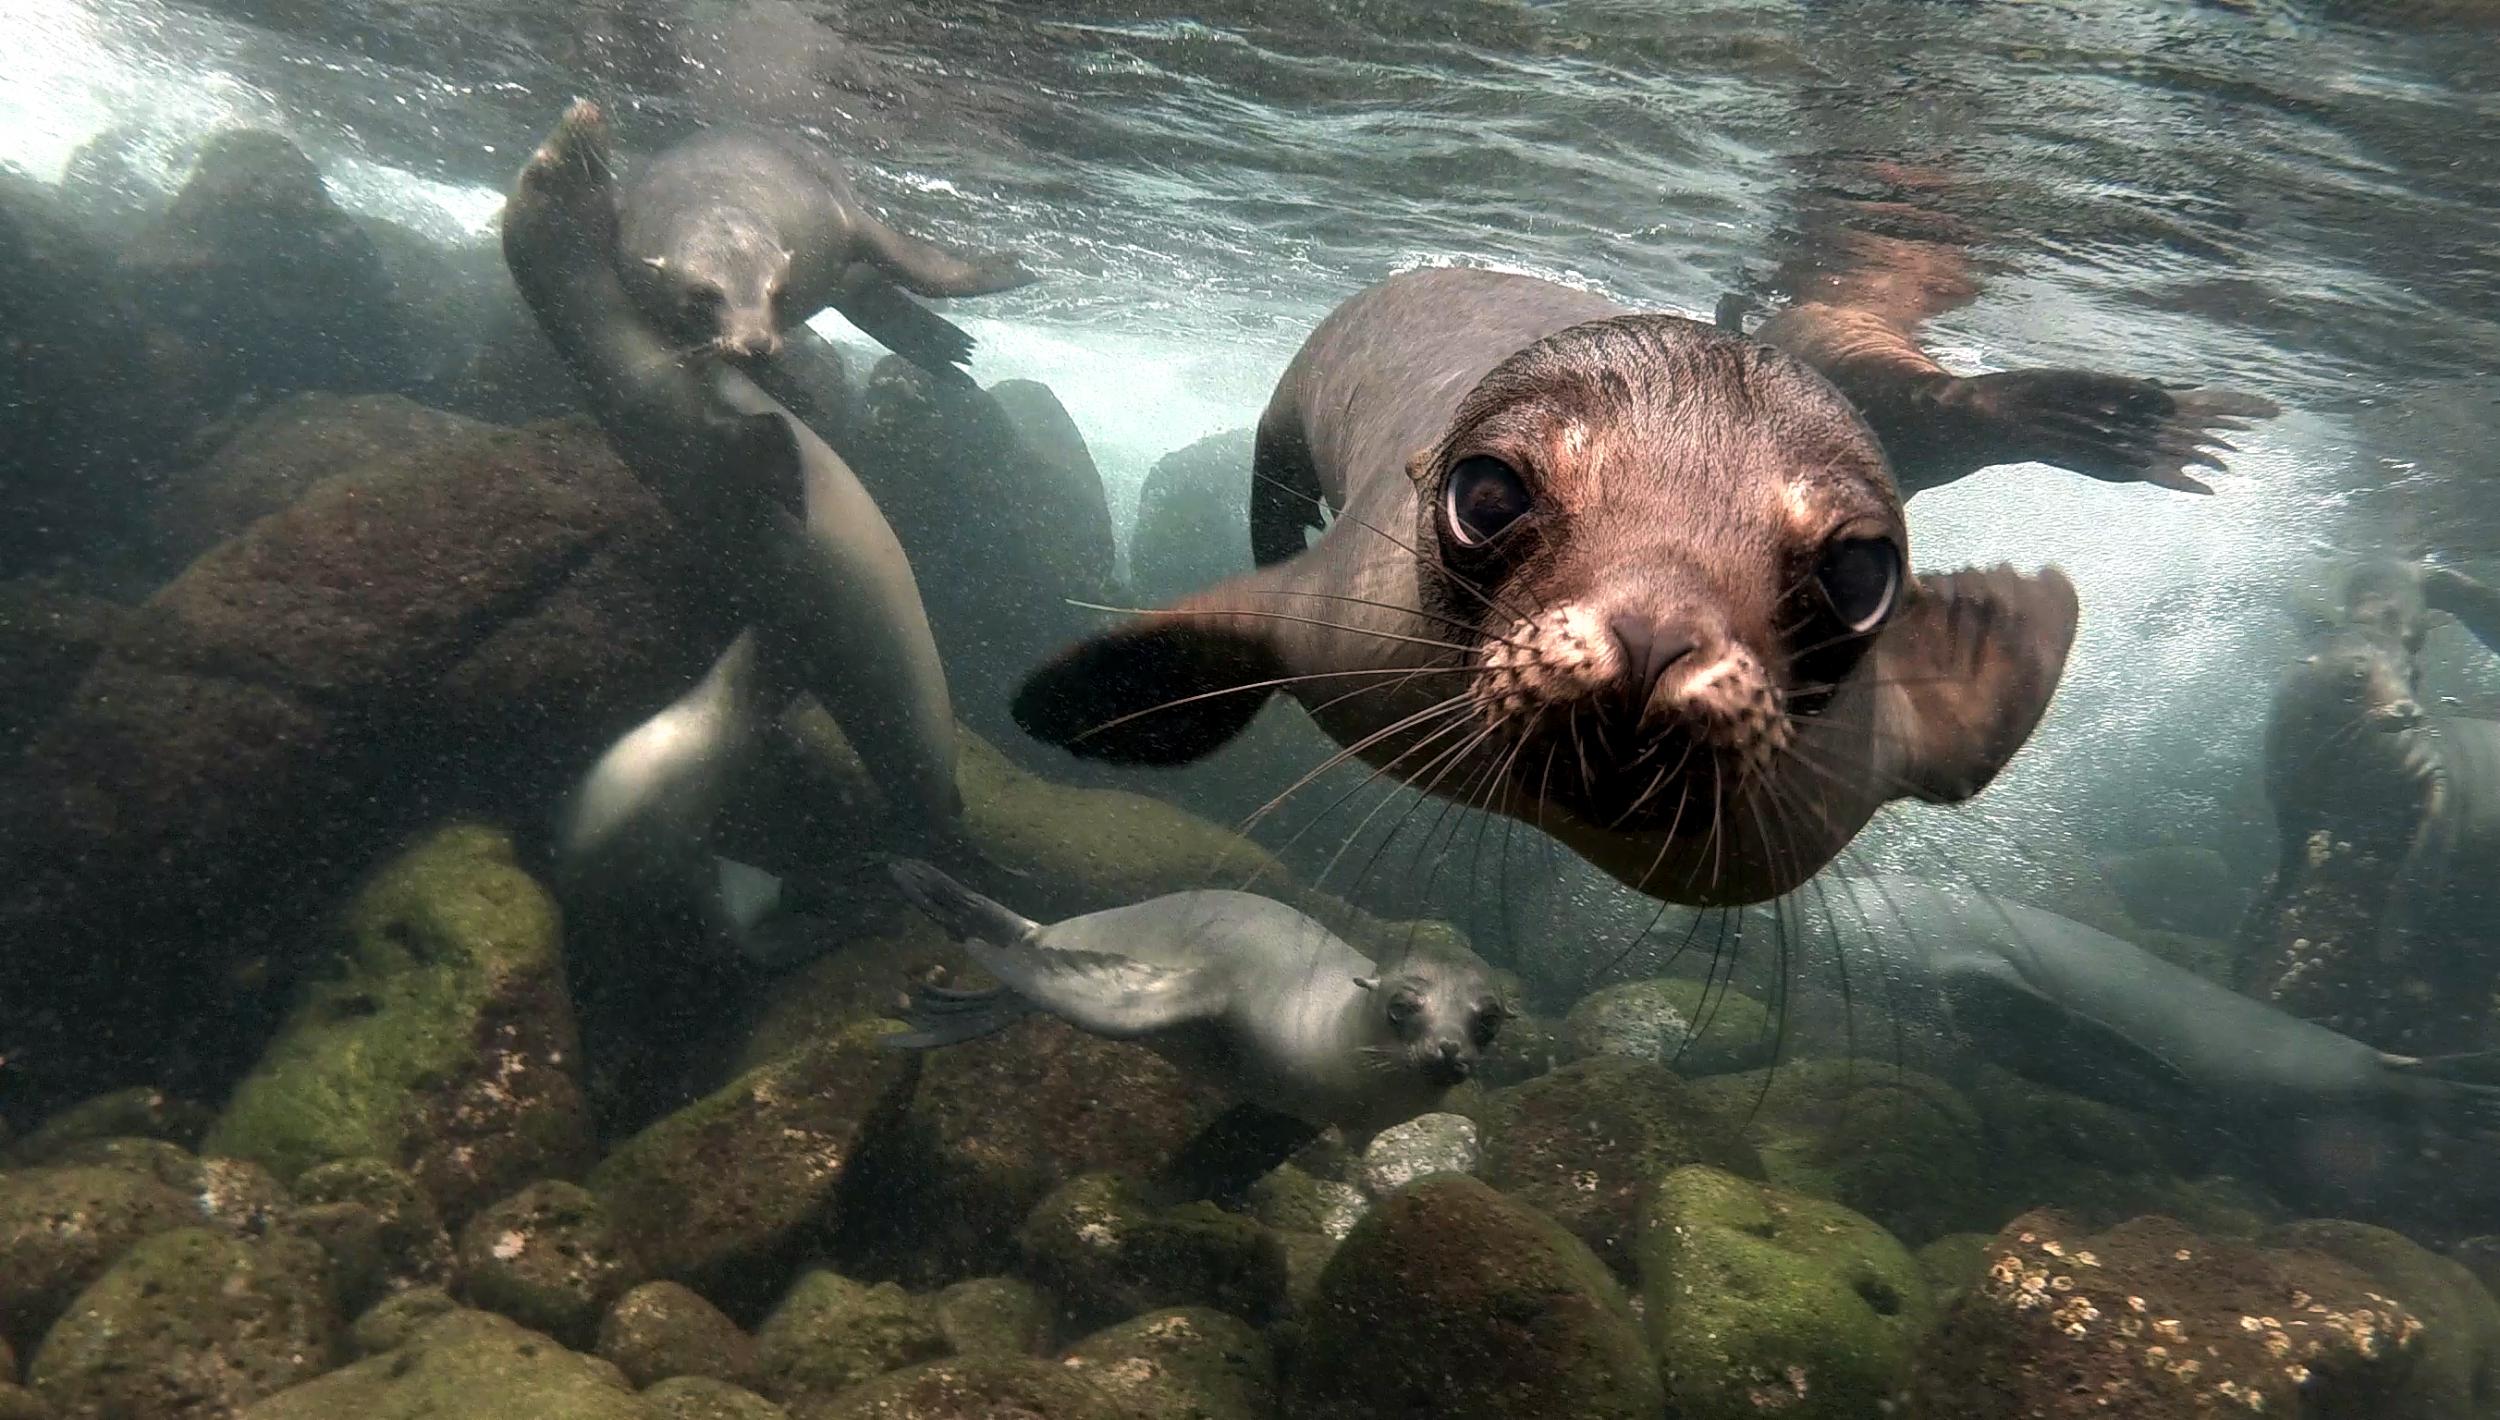 Get up close and personal with seals on a dive trip